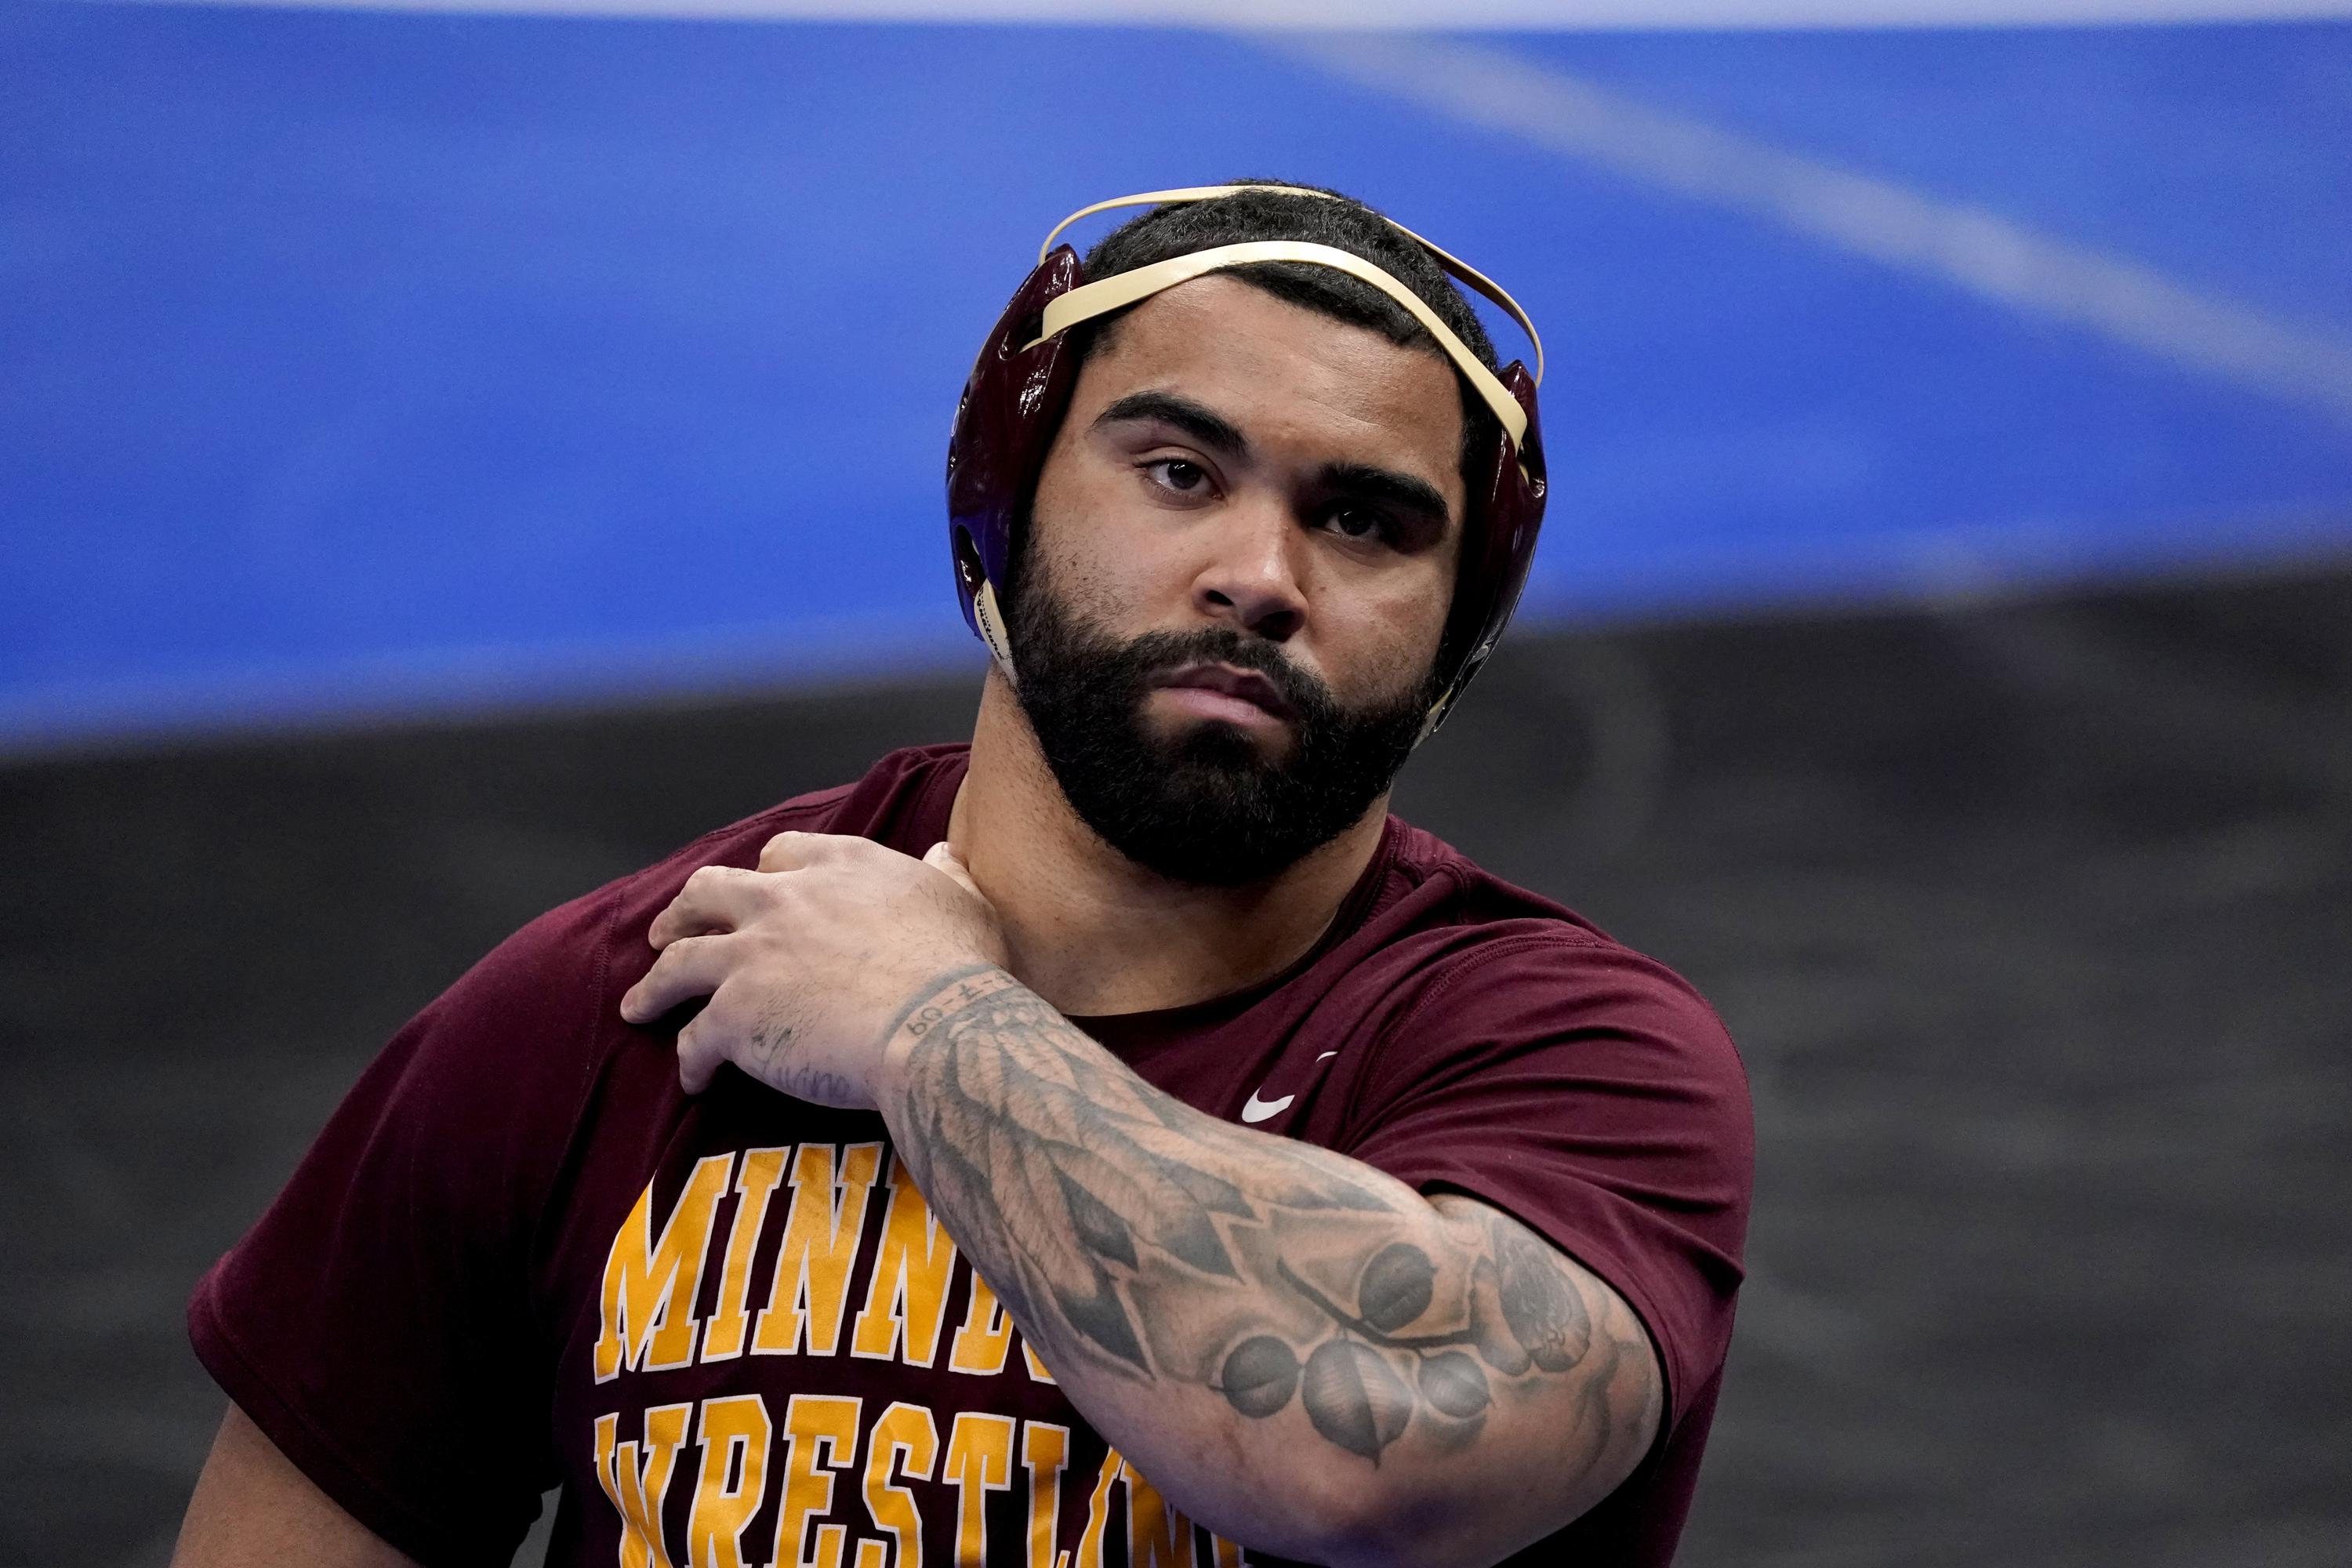 Gable Steveson back at Final X wrestling meet and expected to dominate again